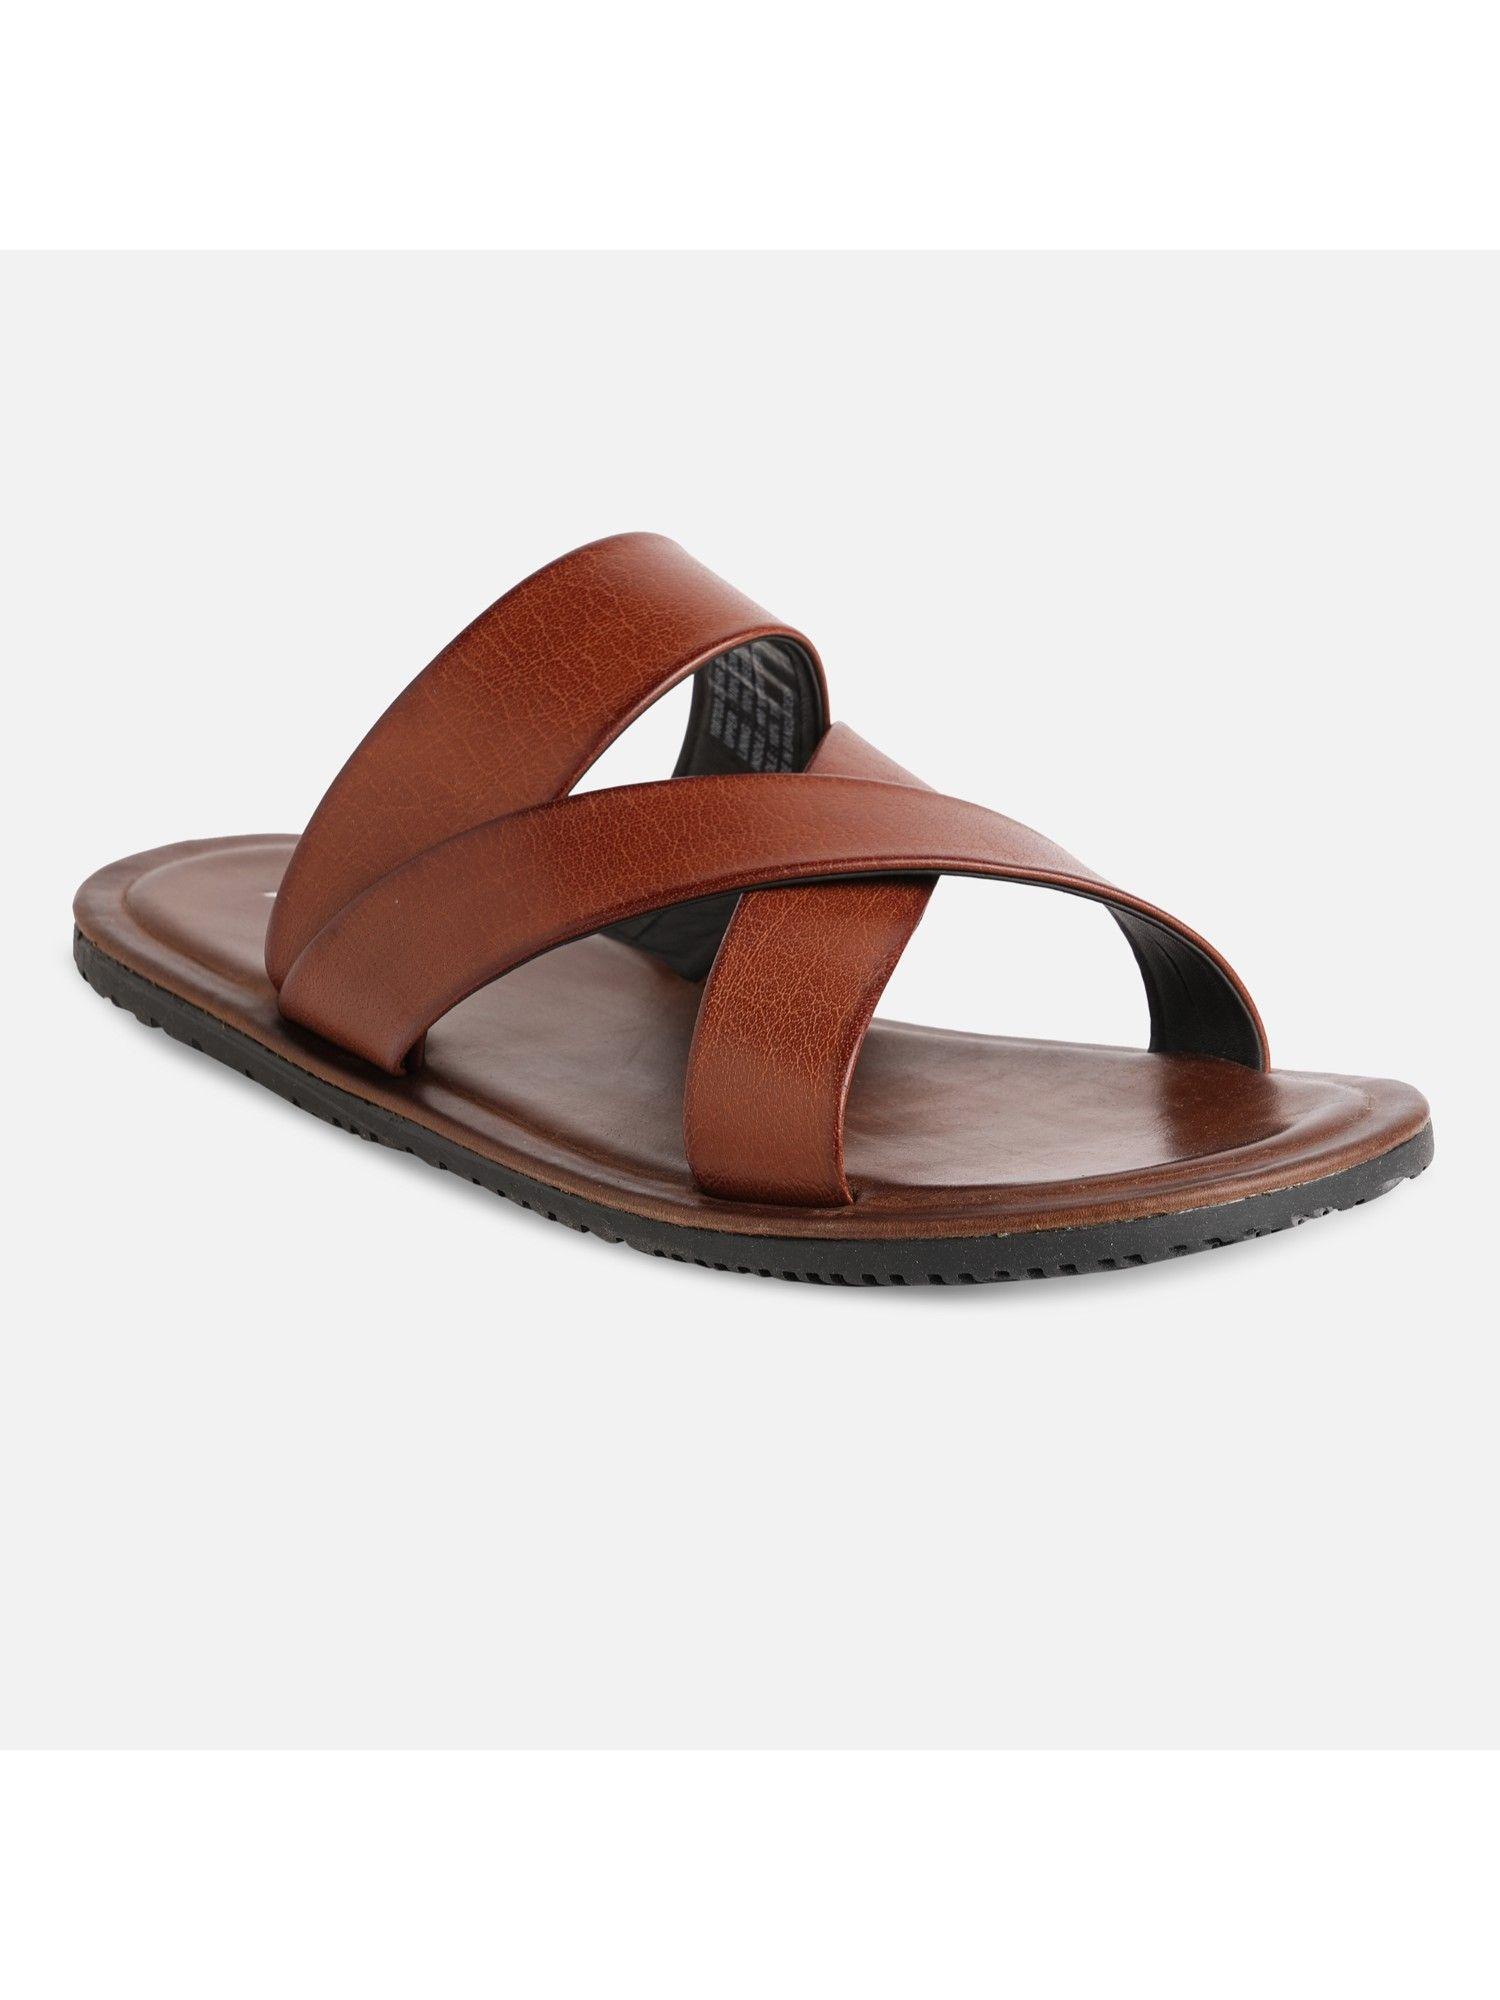 zahir leather tan solid sandals